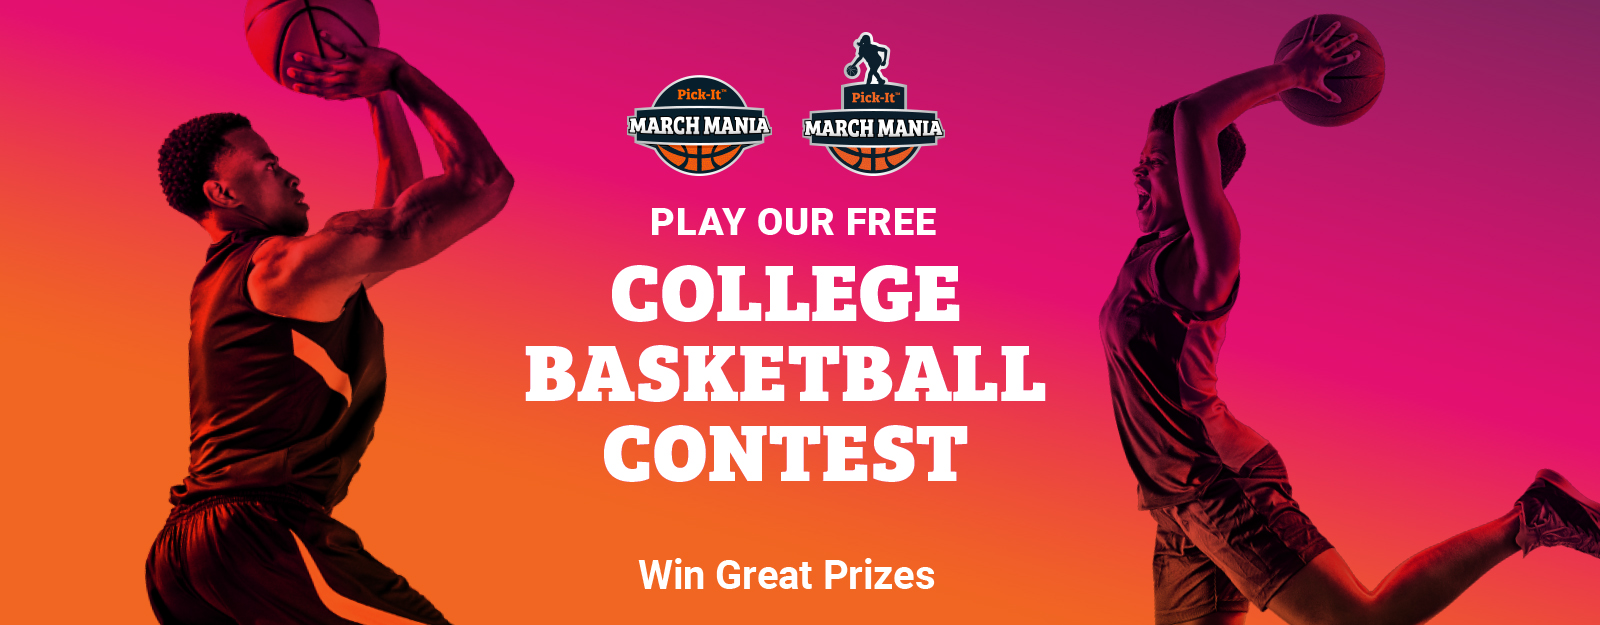 Play Our Free College Basketball Contest - Win Great Prizes!